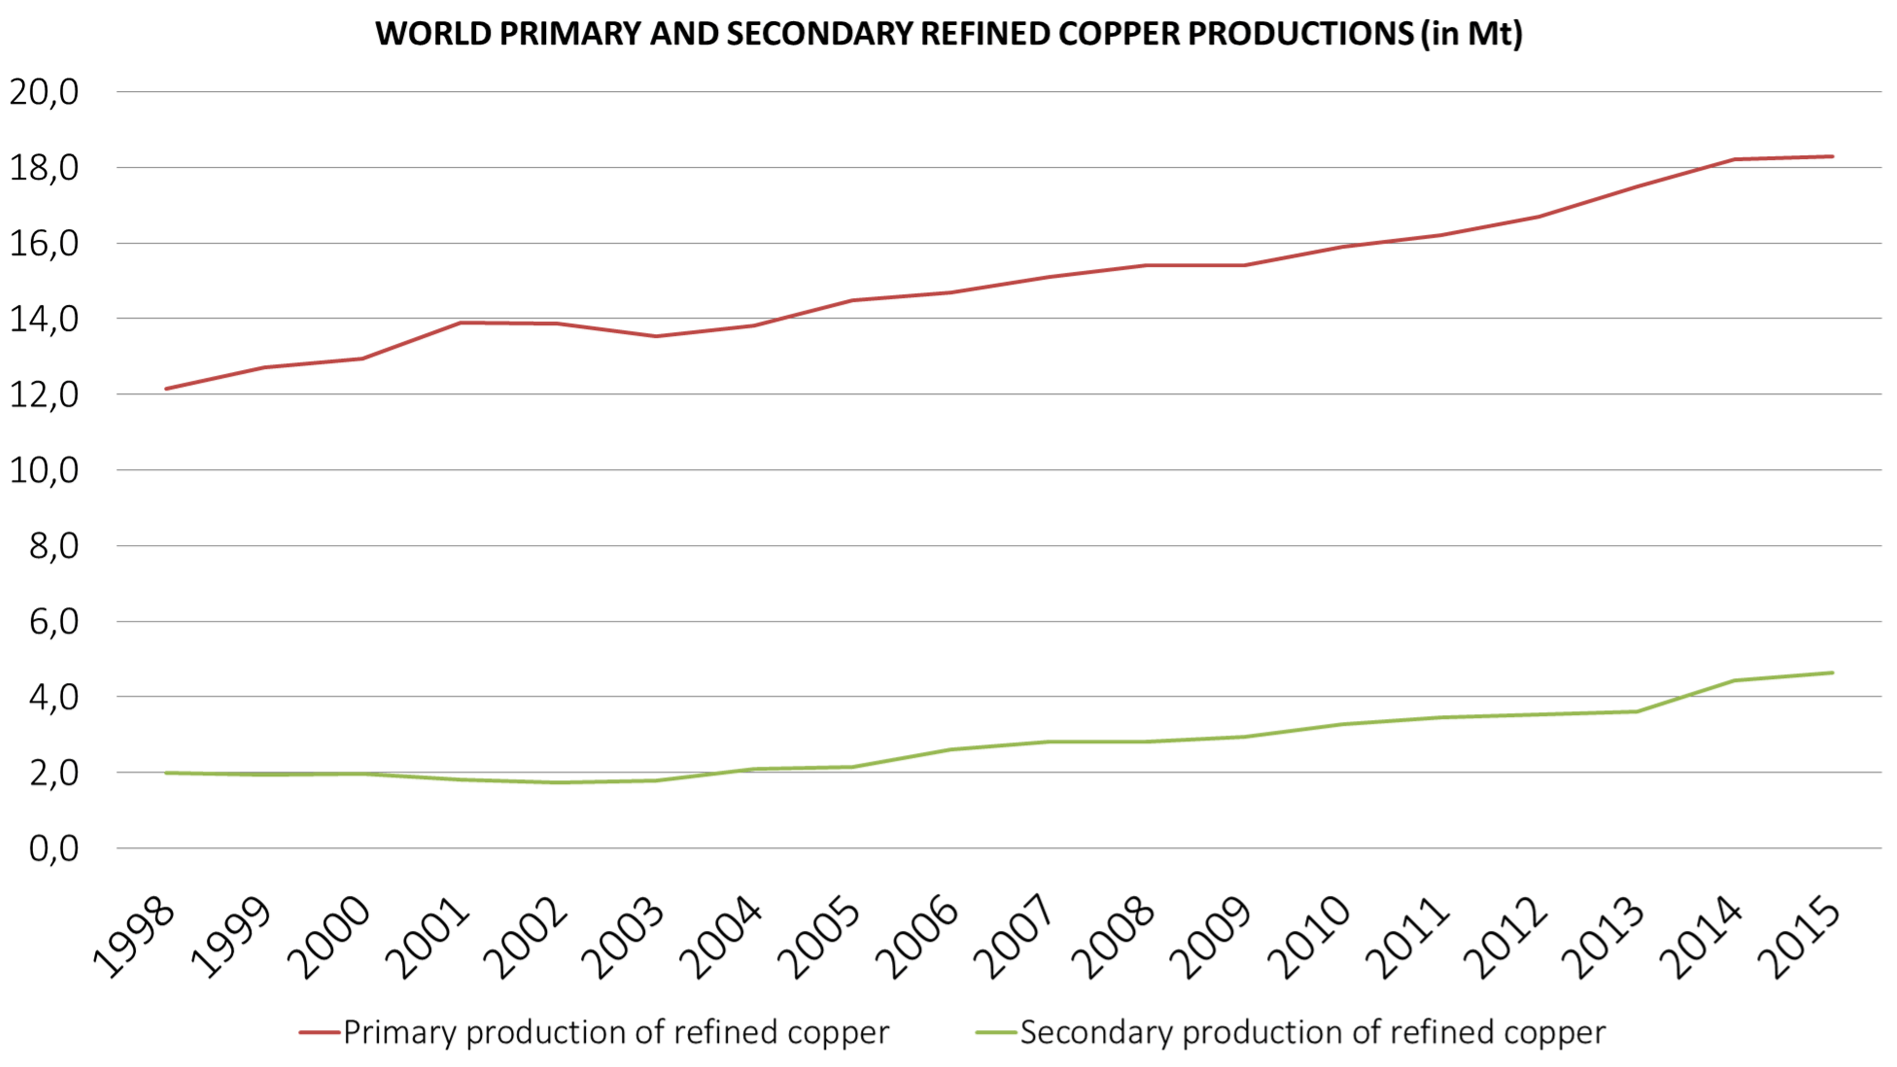 world primary and secondary refined copper production